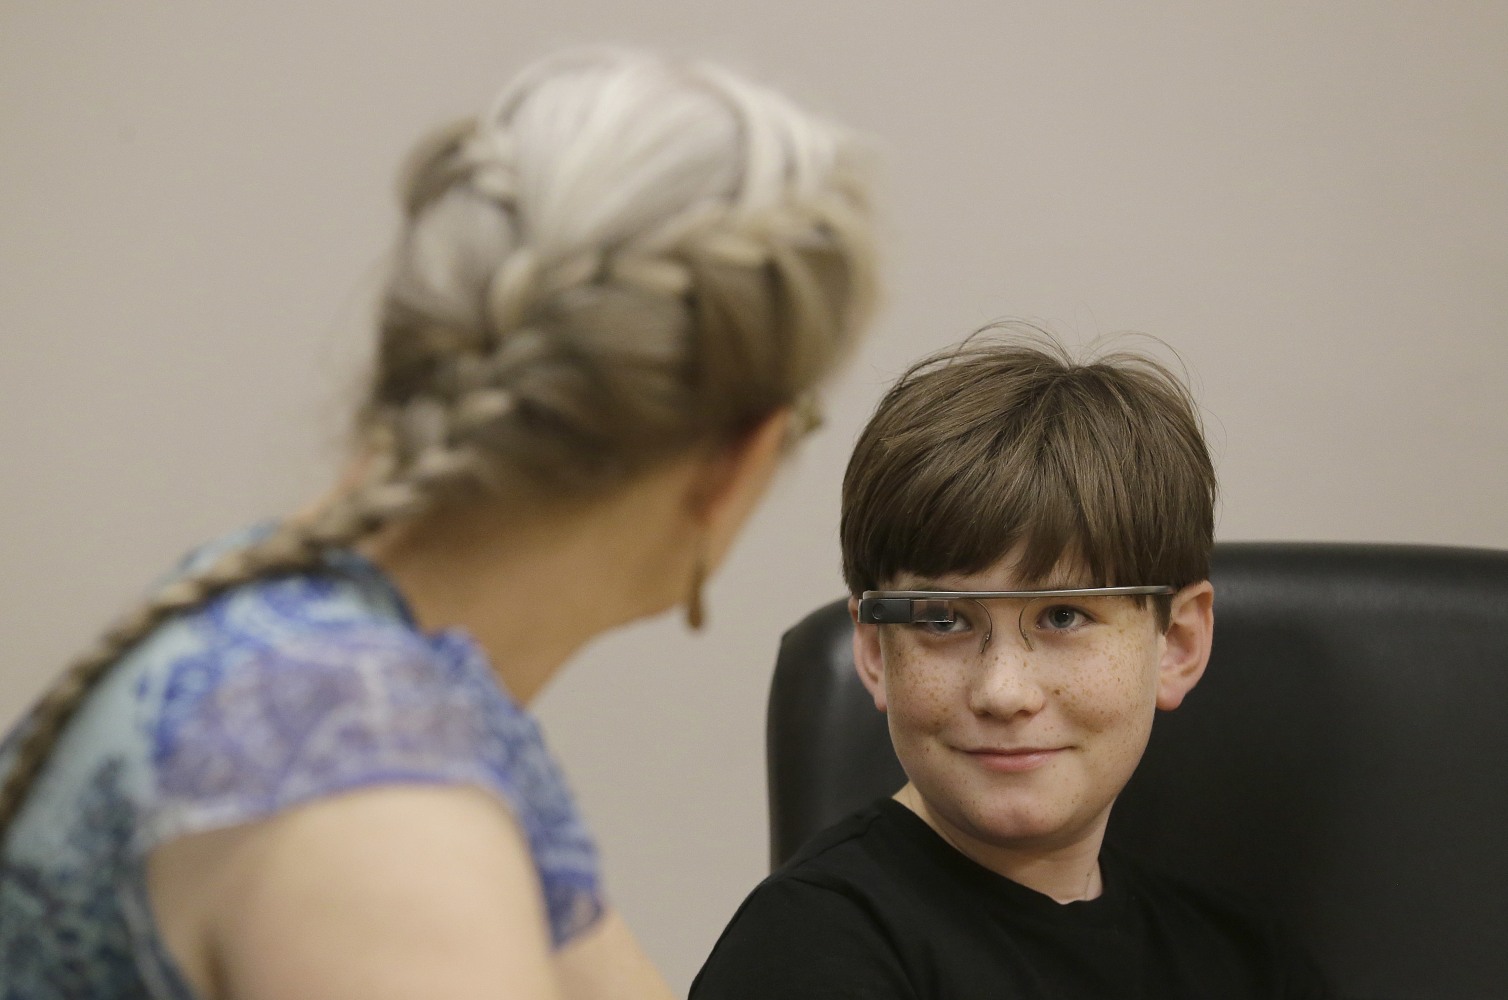 Google Glass App Helps Kids with Autism 'See' Emotions - NBC News1509 x 1000